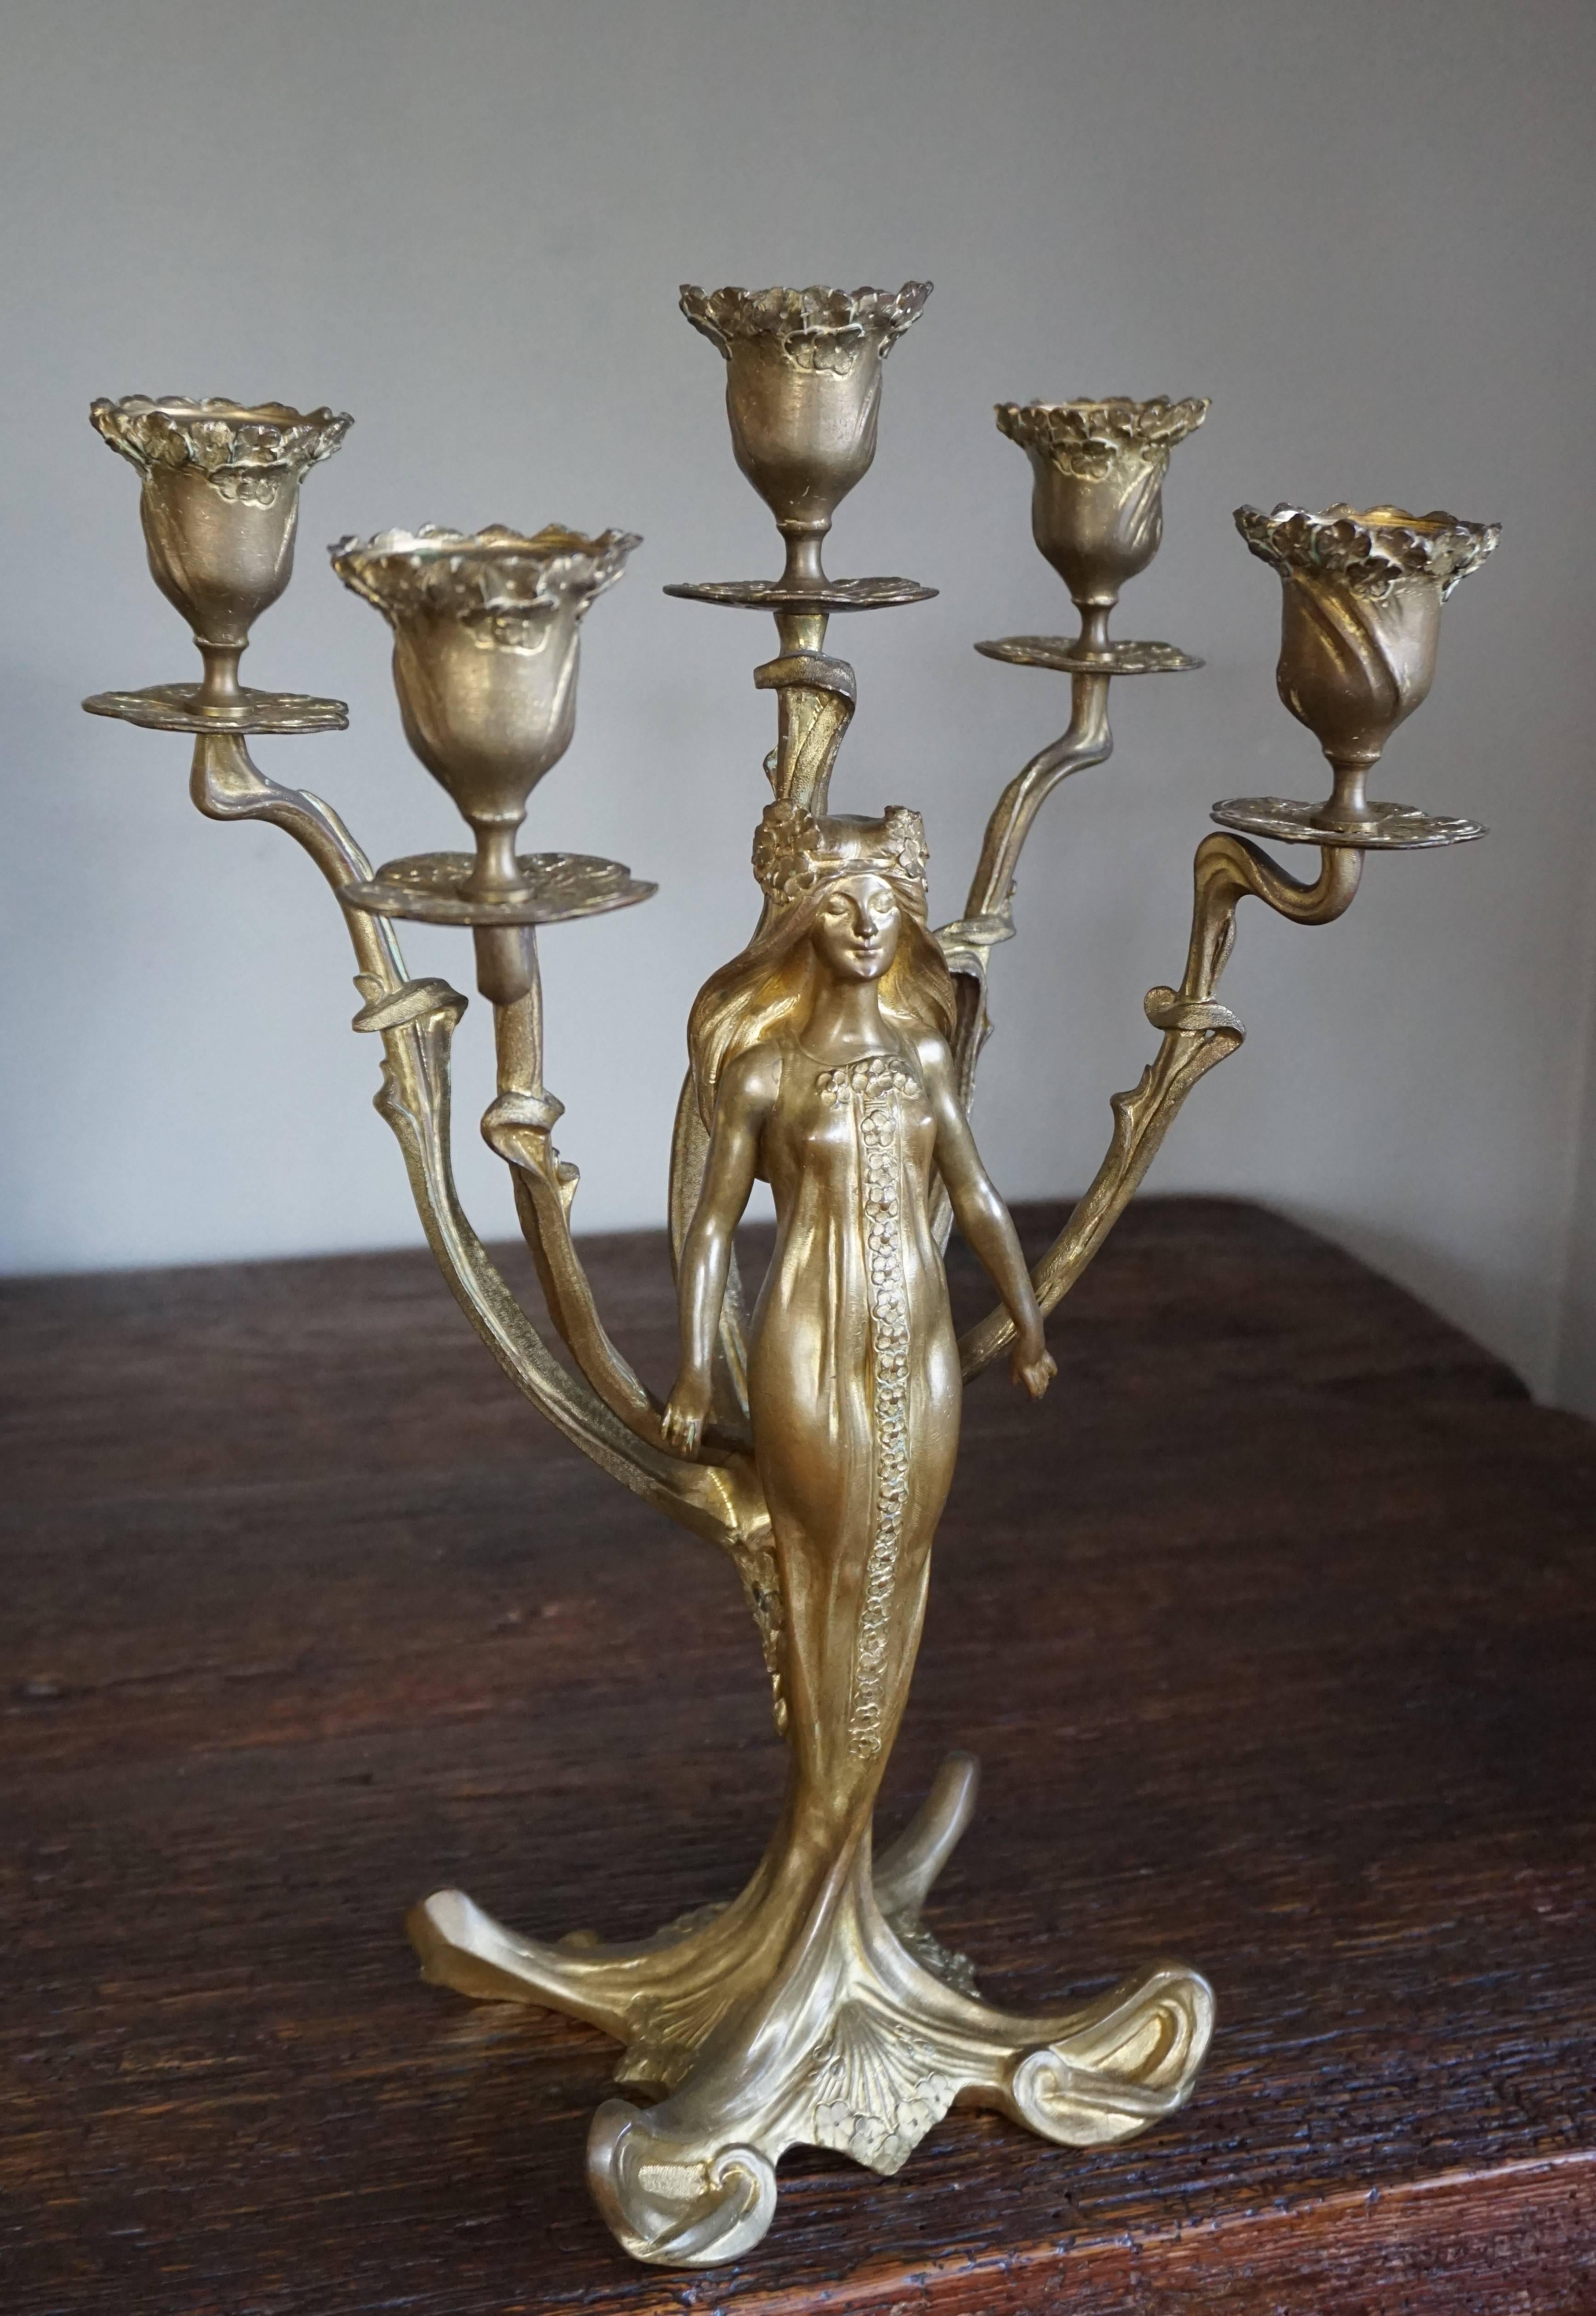 French Art Nouveau Gilt Bronze Lady Sculpture Mantel Clock with 2 Matching Candelabras For Sale